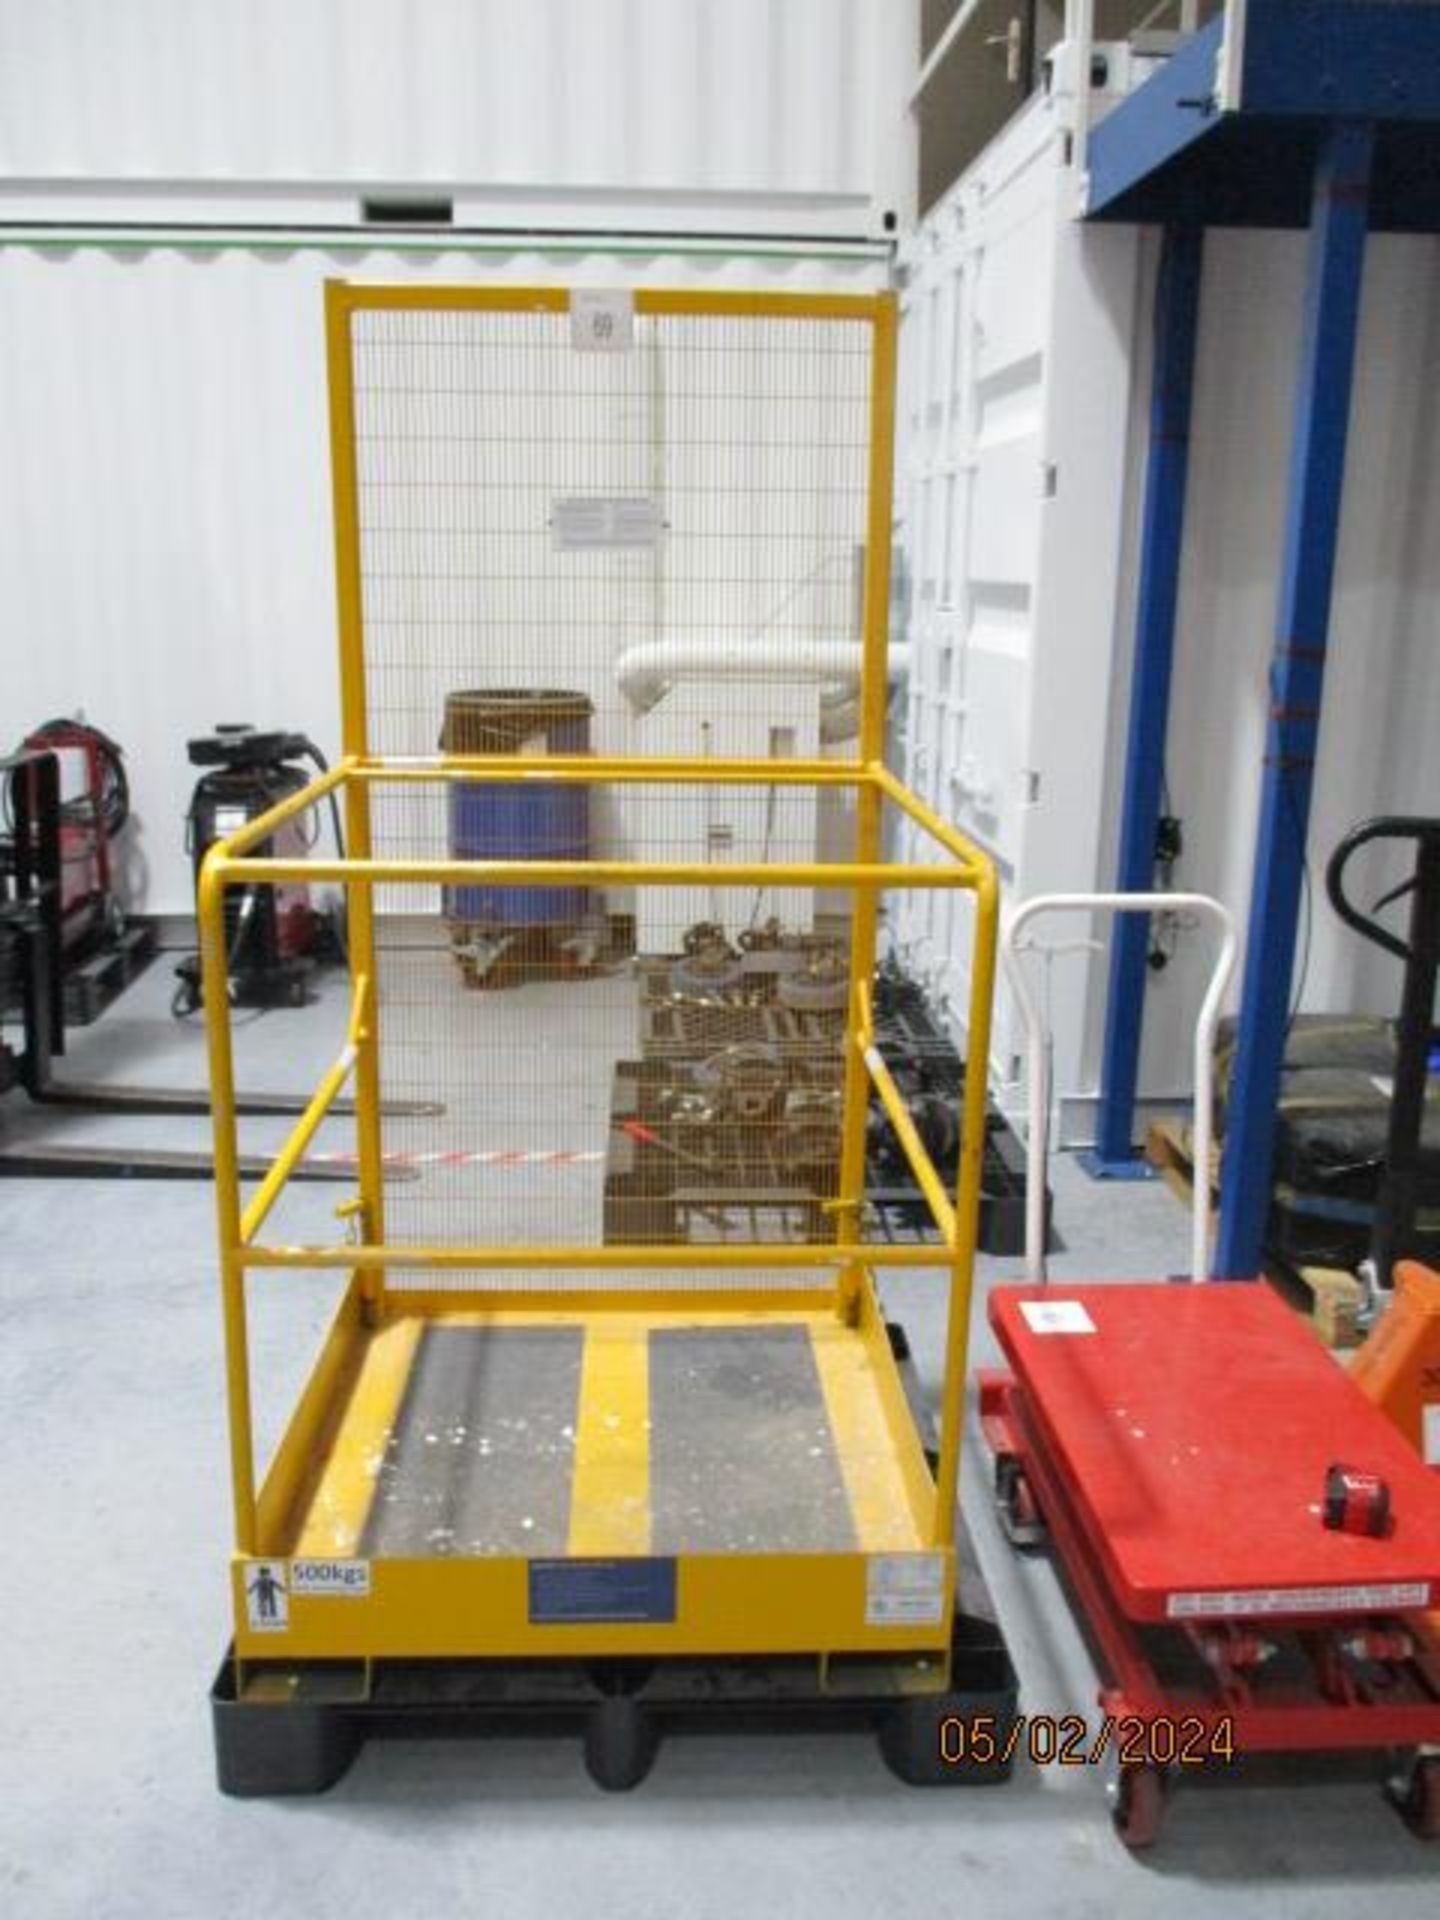 1, Contact WP-STD MK4 2 Man Pedestrian Safety Forklift Cage Serial No. 122459 (2022) with 500Kg Safe